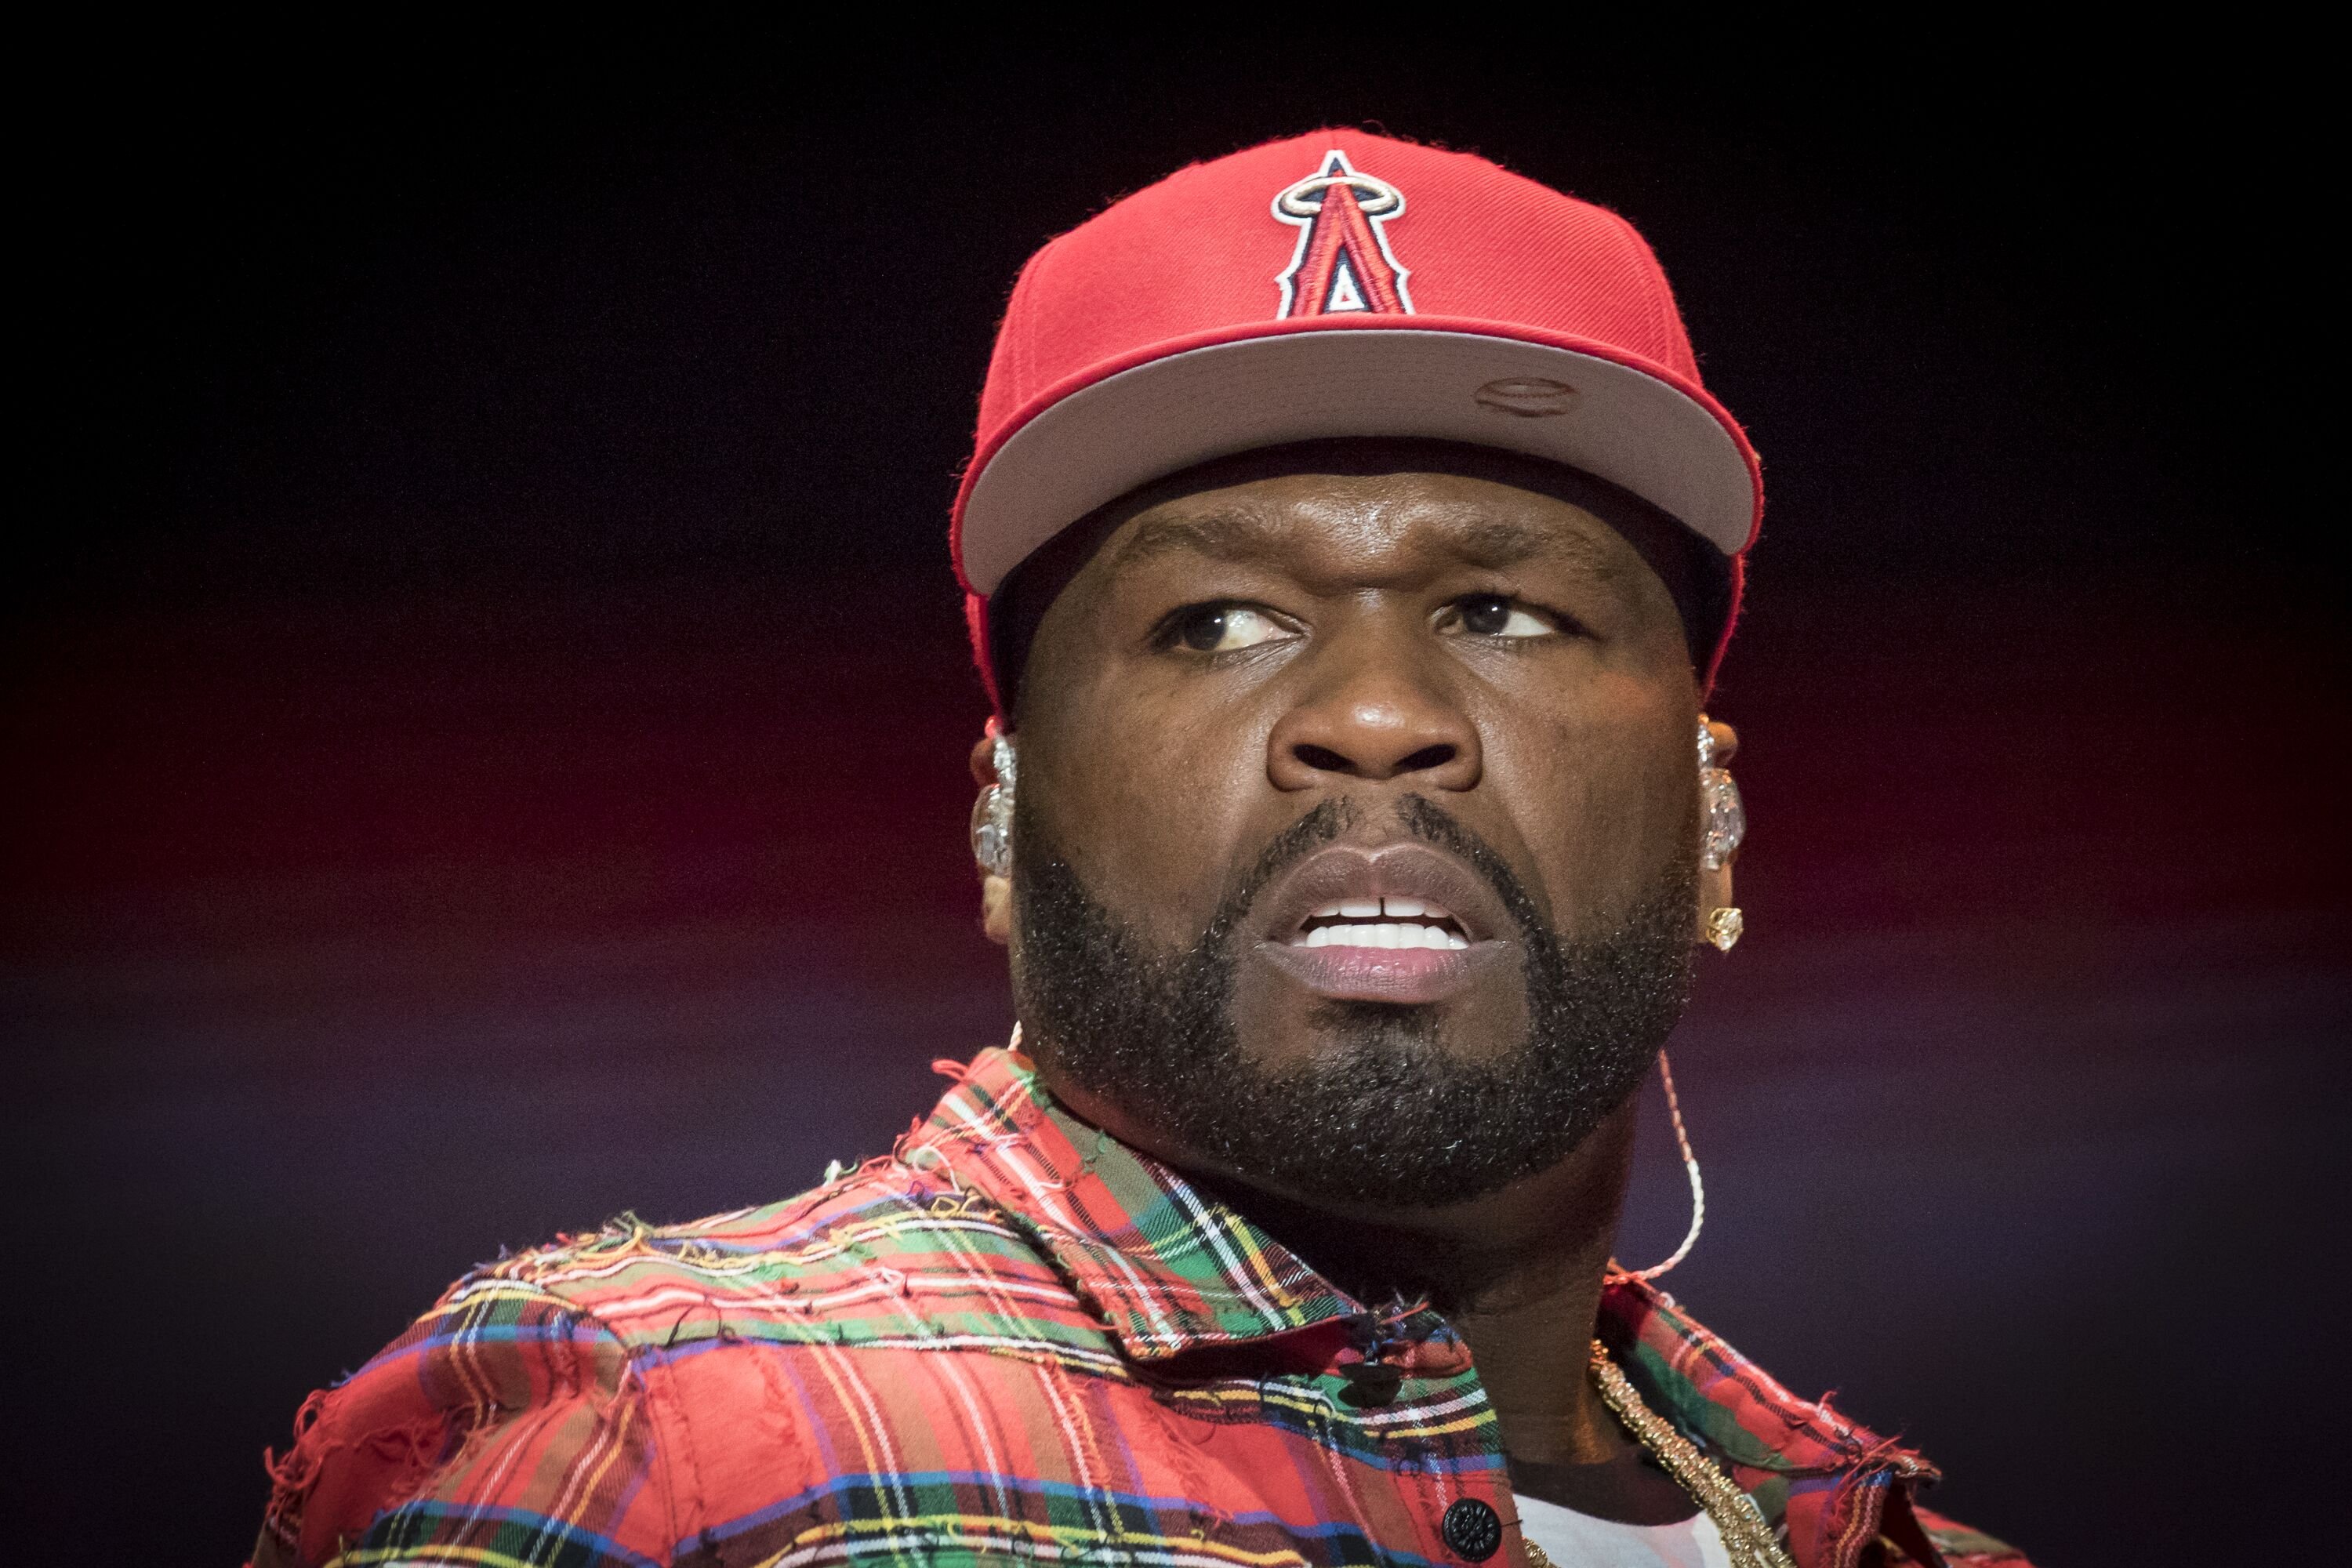 50 Cent Slams Street Artist Lushsux for New Wall Art of His Face – See